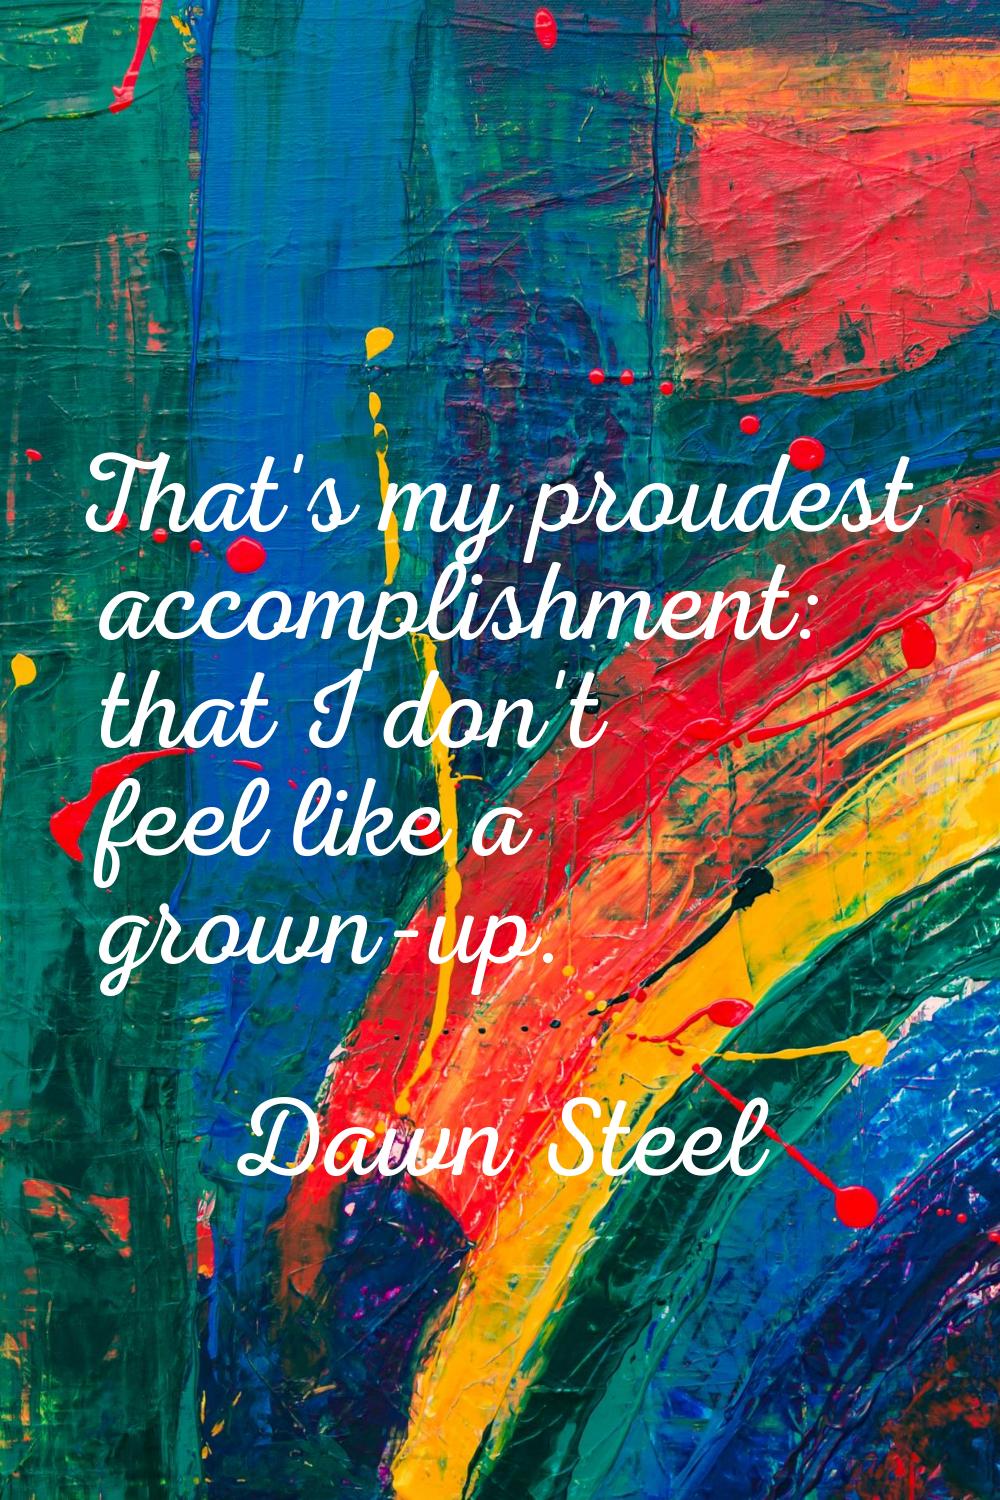 That's my proudest accomplishment: that I don't feel like a grown-up.